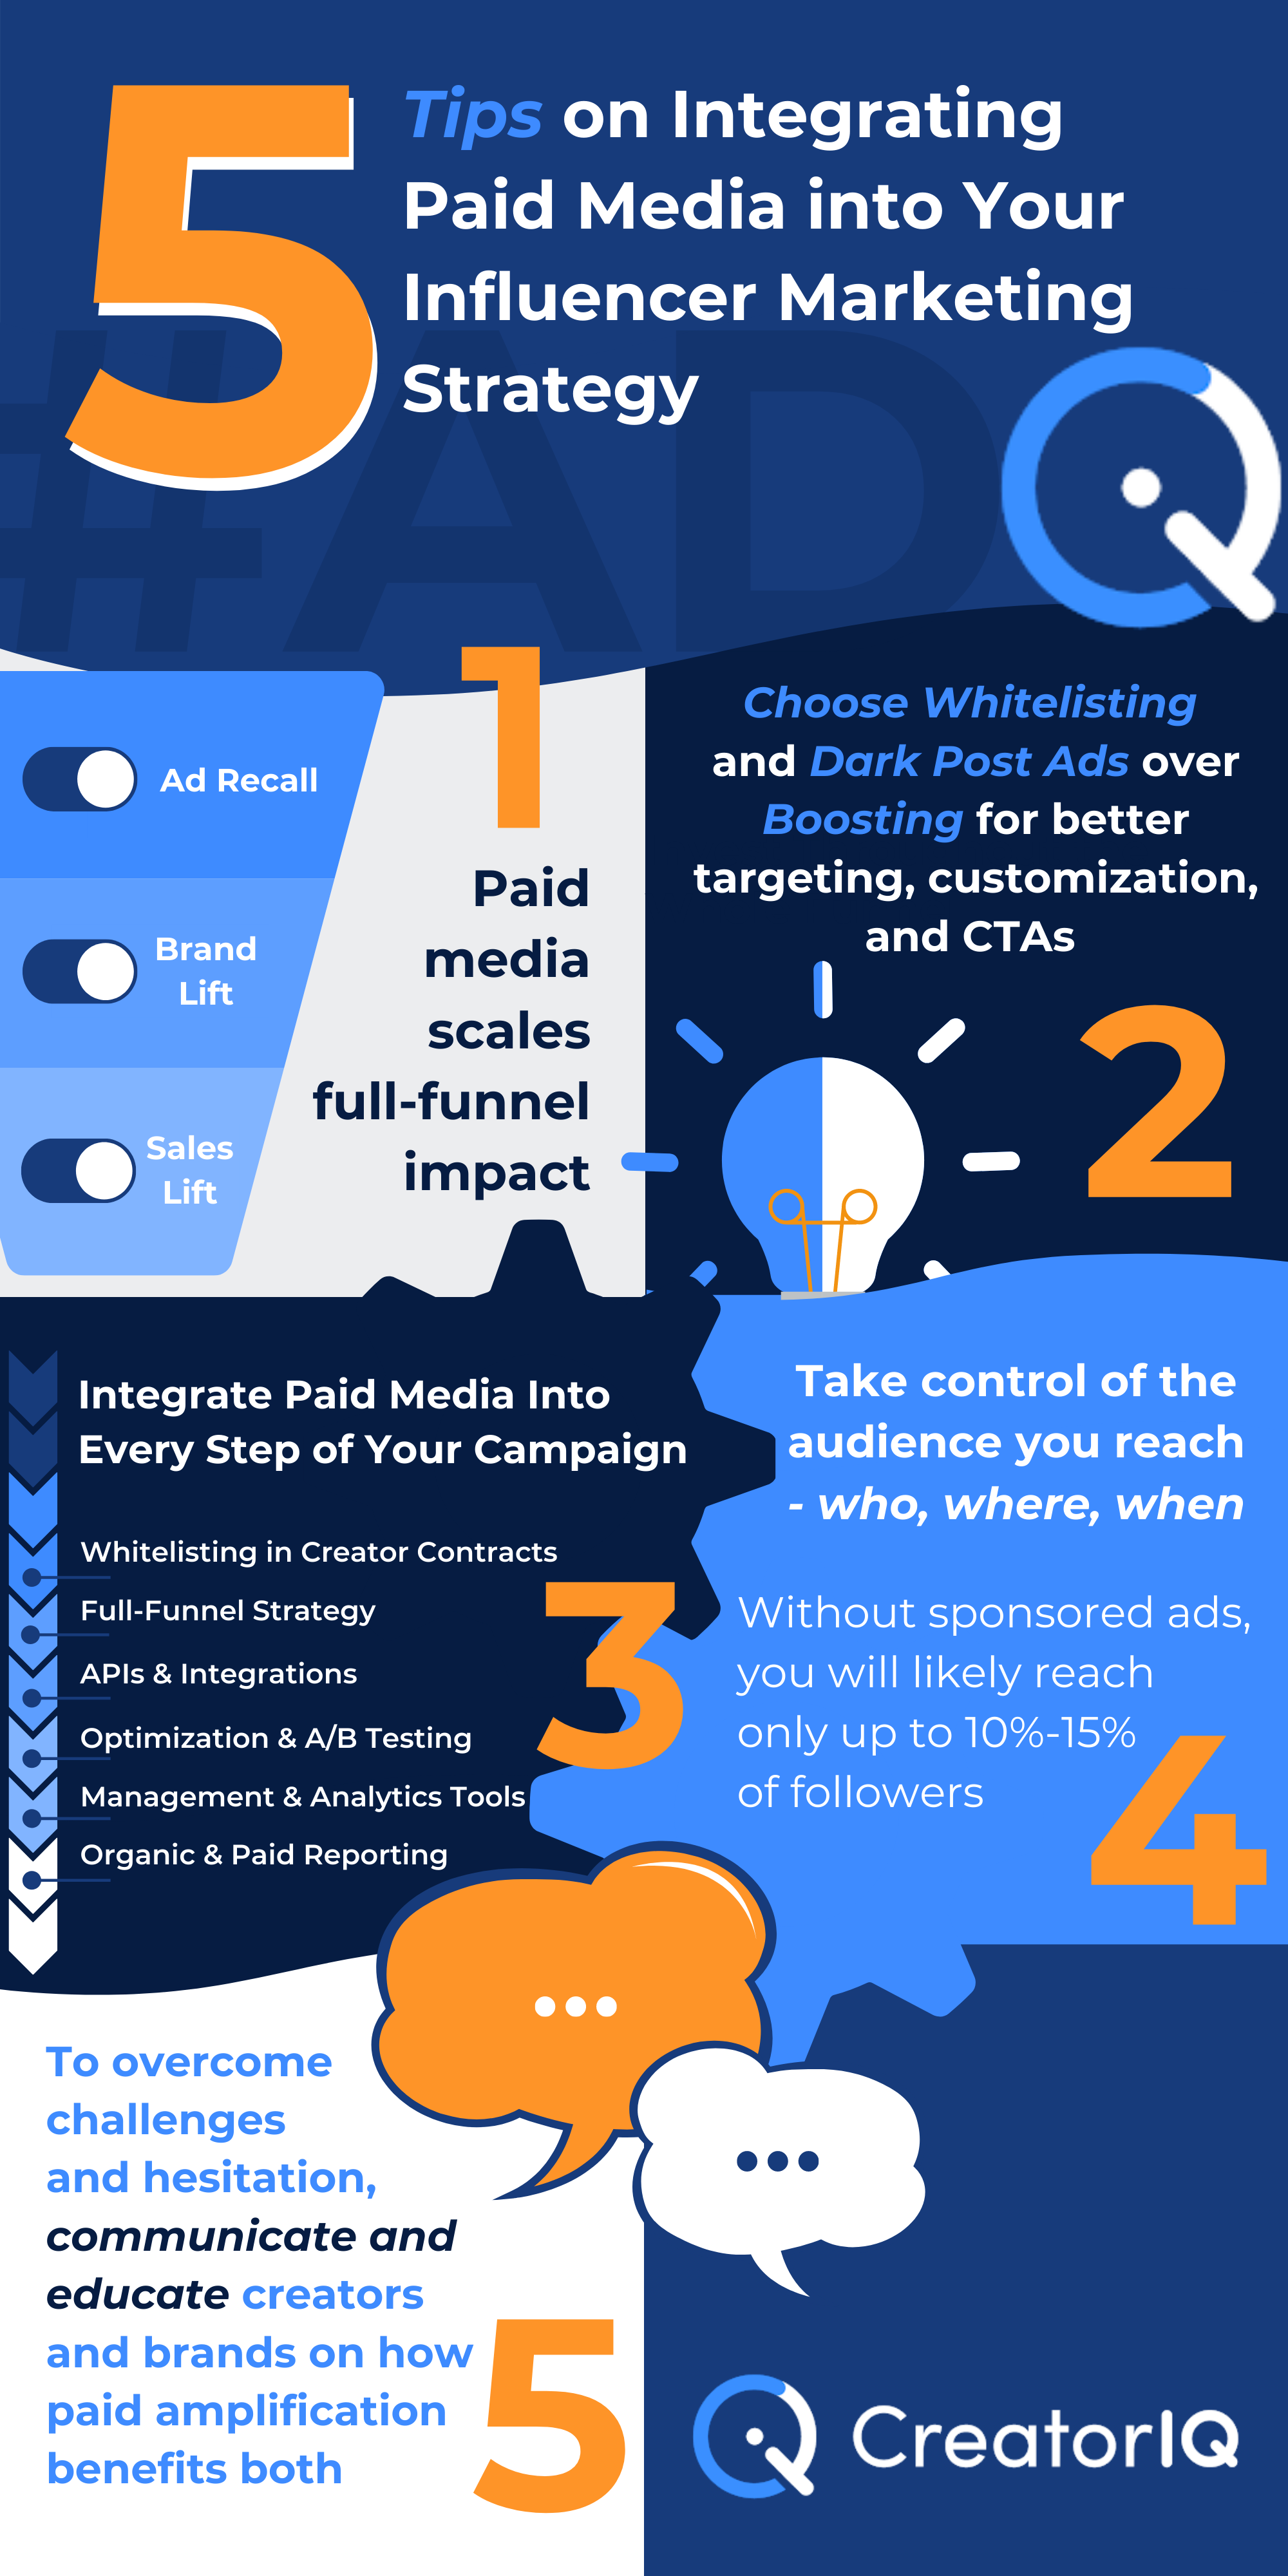 [Infographic + Video] Virtual Views: How To Integrate Paid Media Into Your Influencer Marketing
